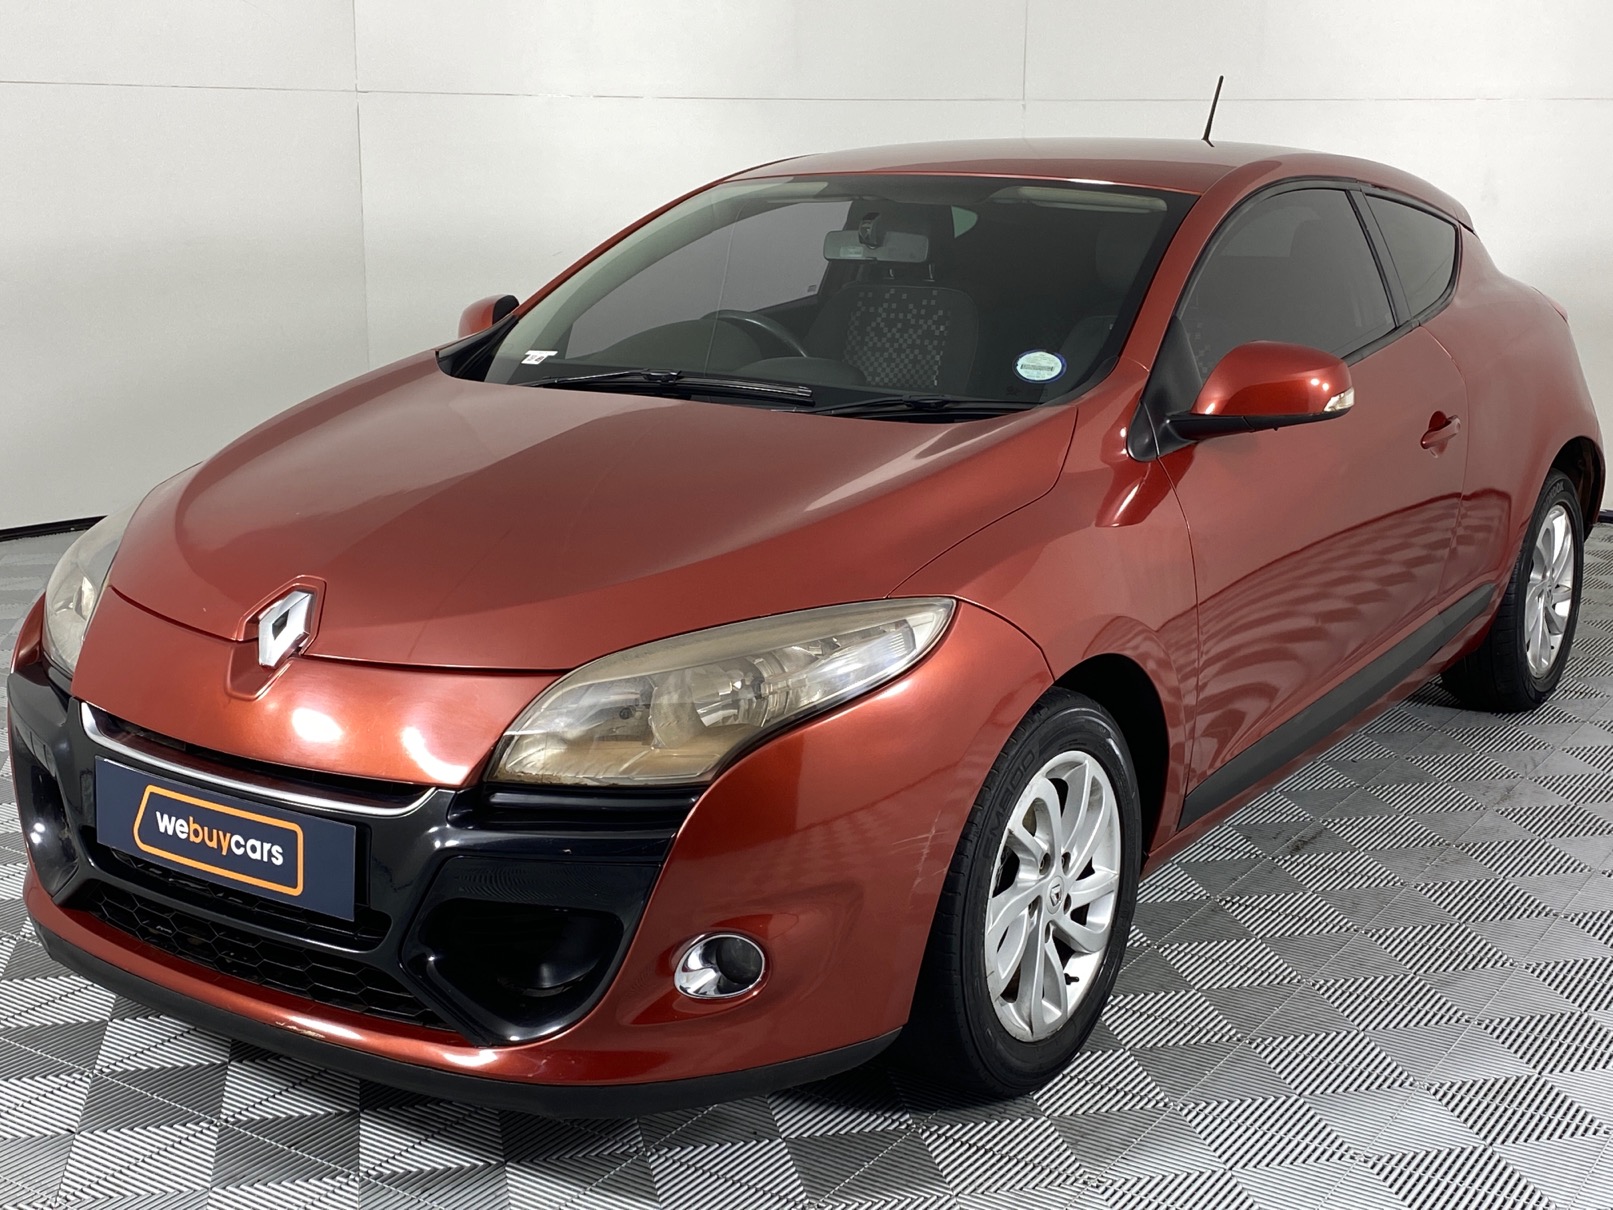 Used 2012 Renault Megane III 1.6 Dynamique Coupe for sale